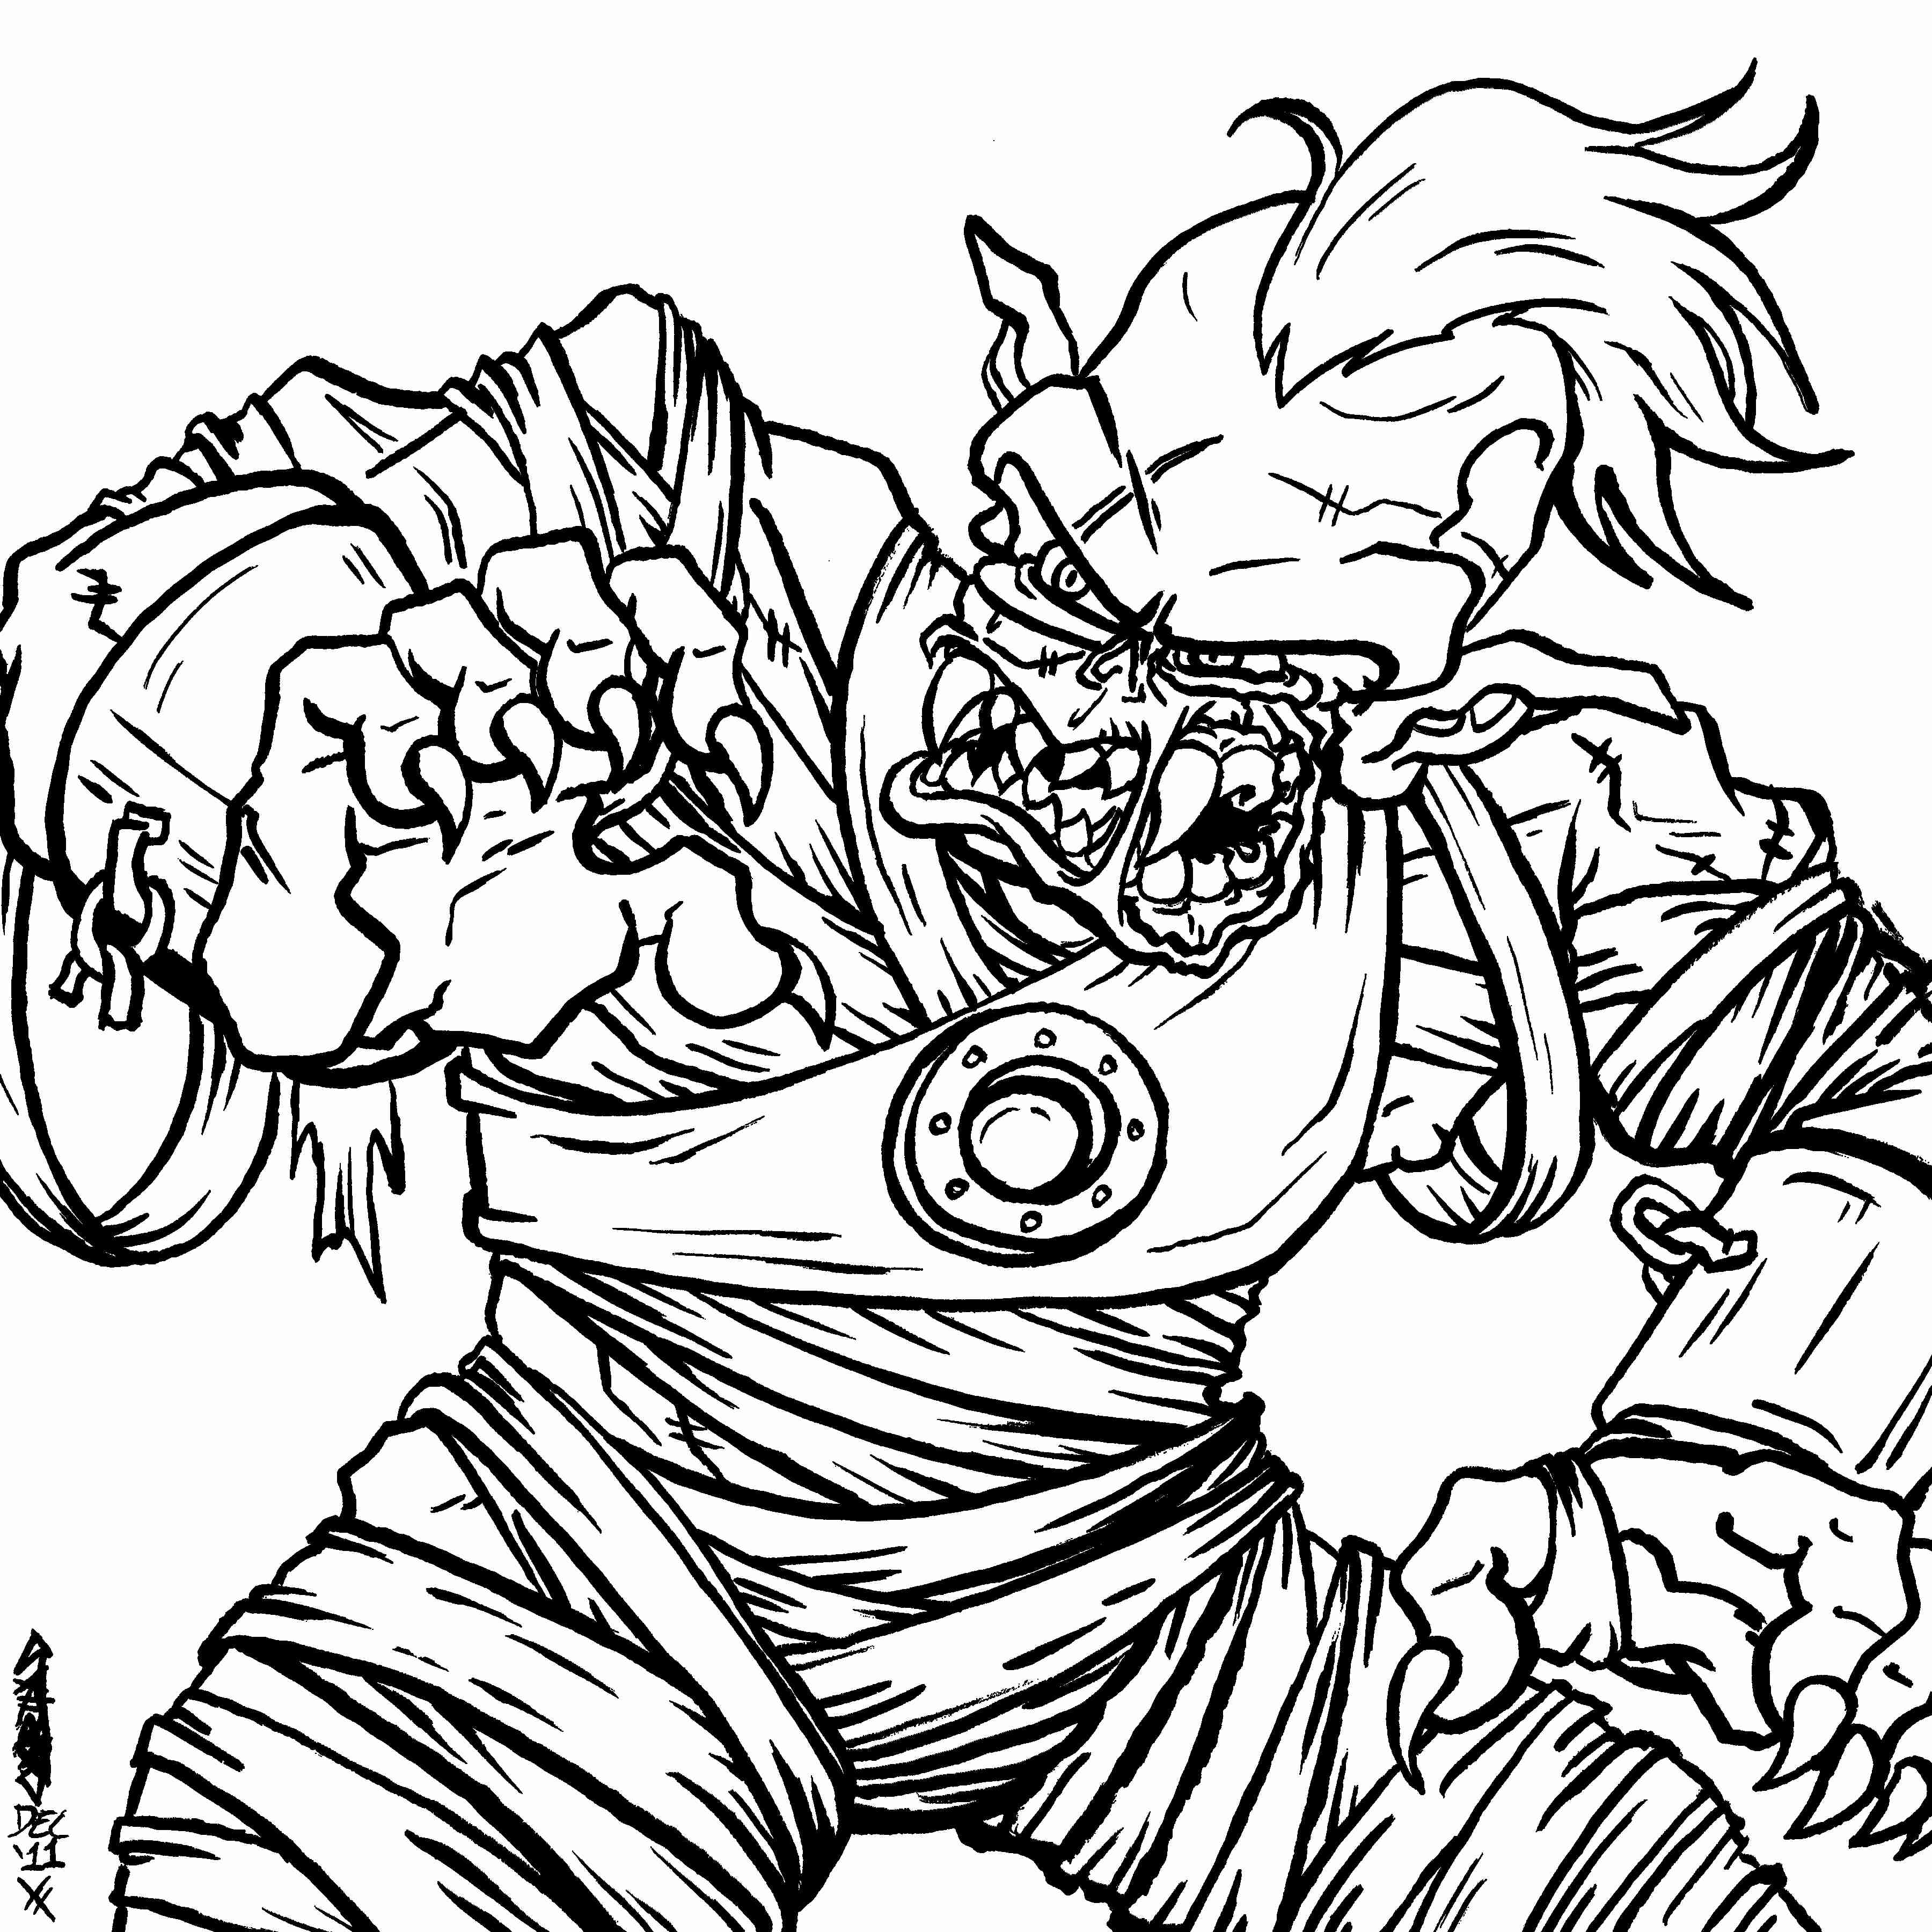 Zombie Coloring Pages For Kids at GetColorings.com | Free ...